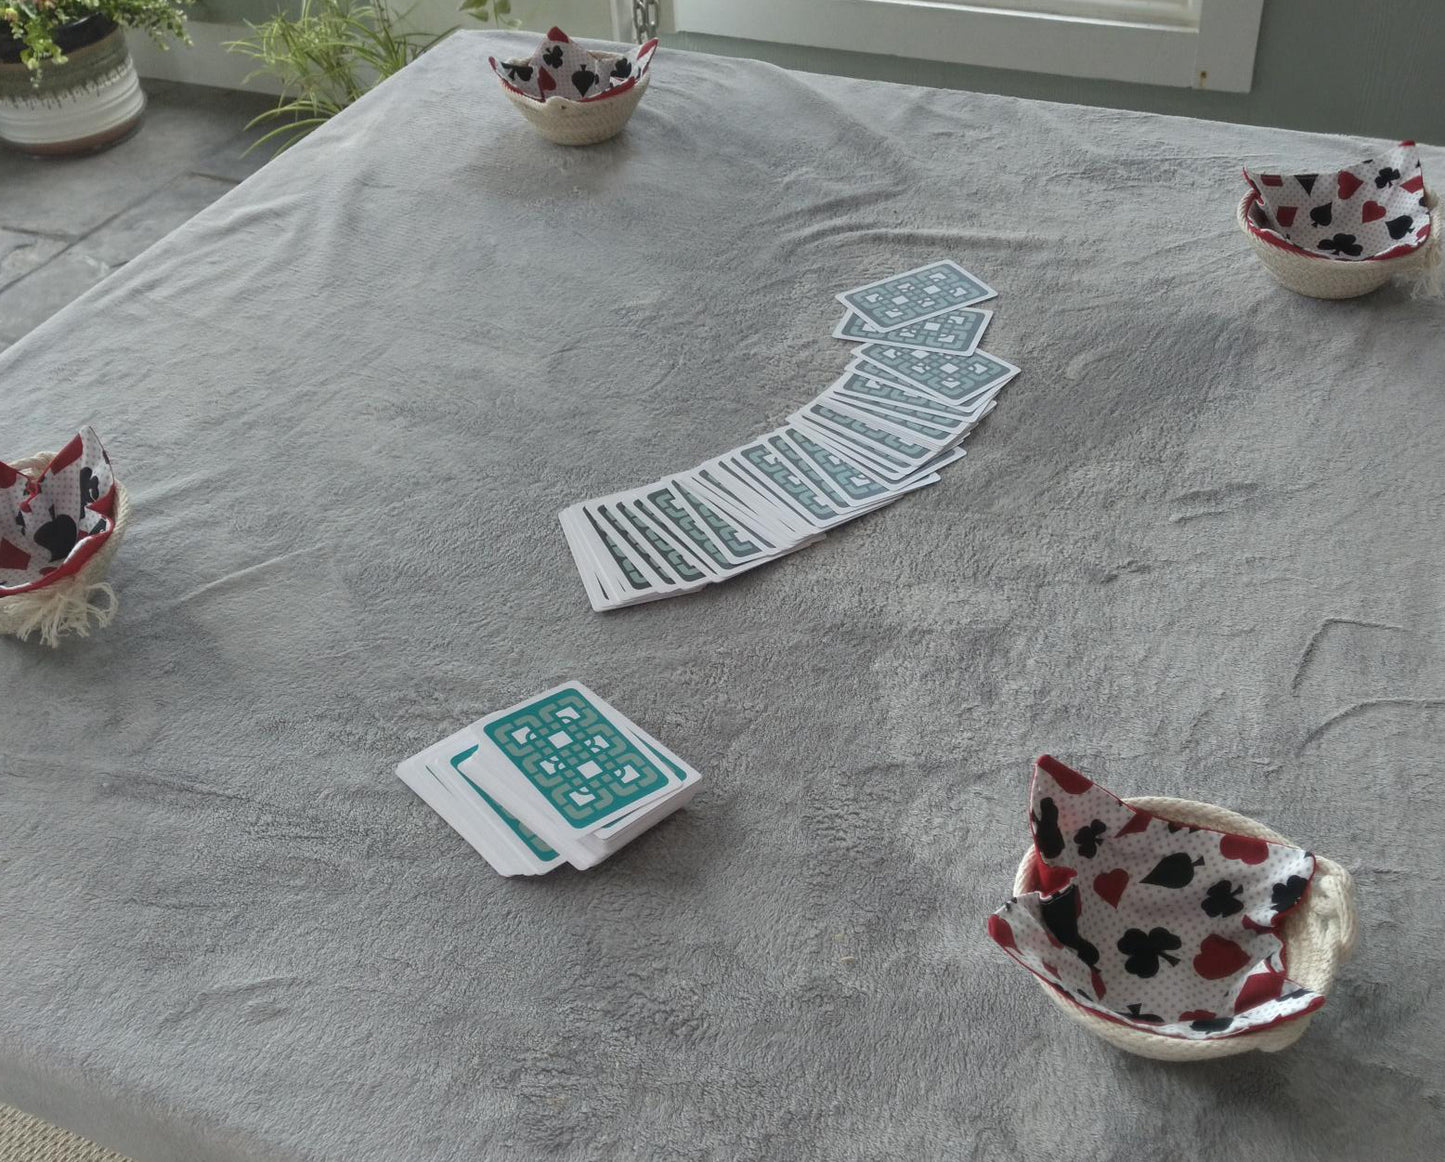 Set of Snack Bowls for the Game Table